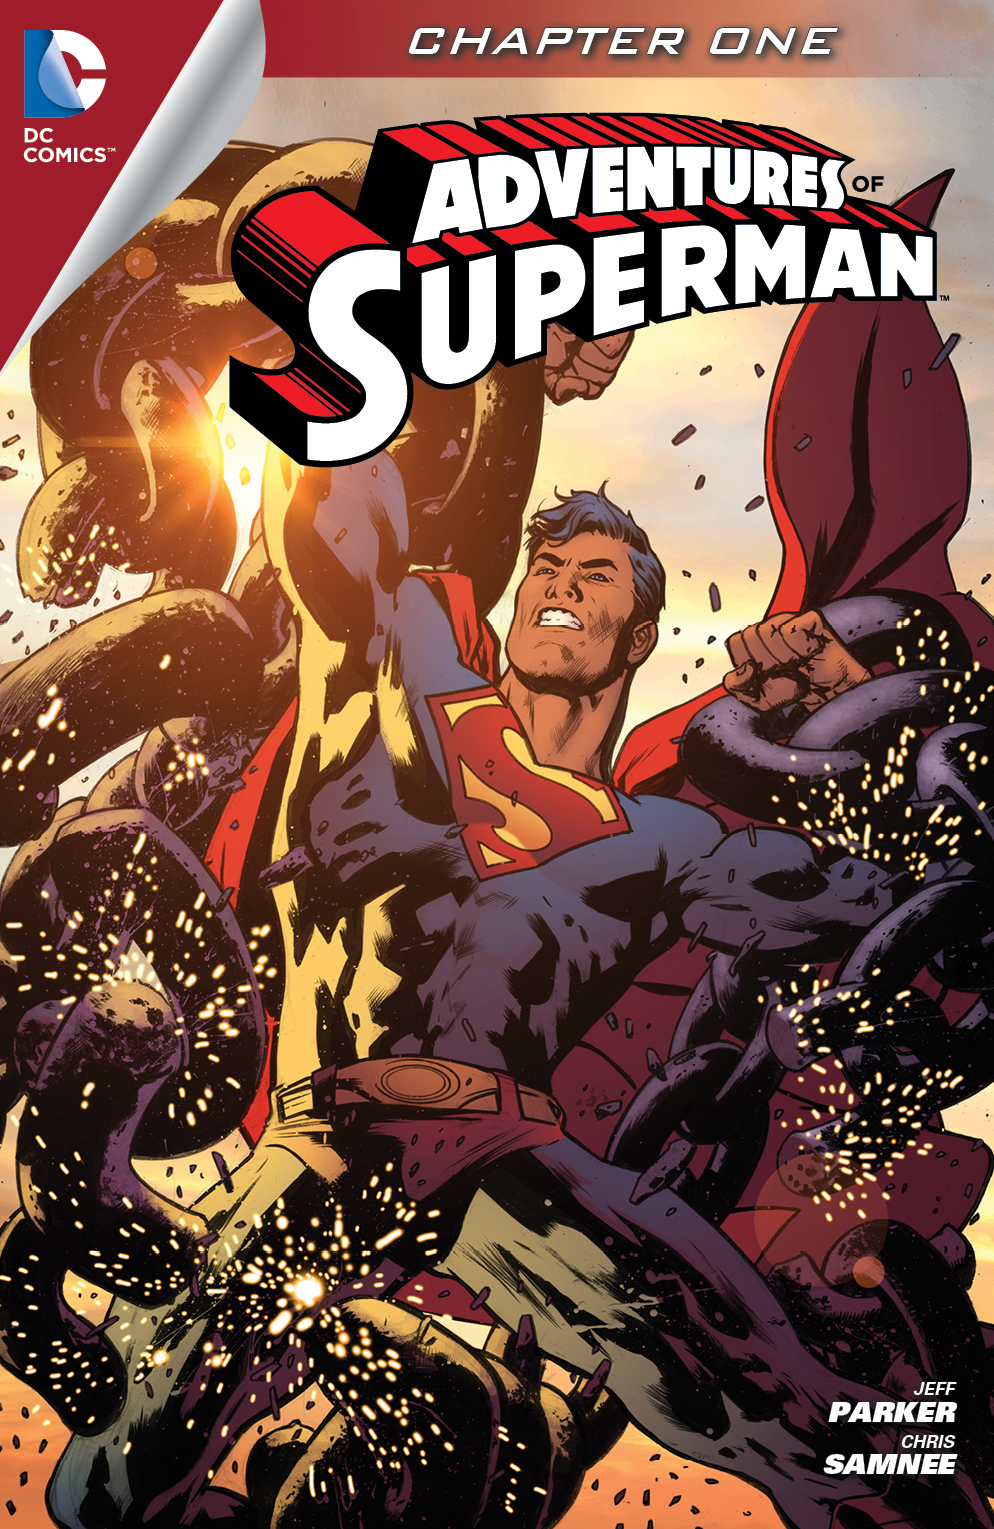 Adventures of Superman (2013-) #1 preview images